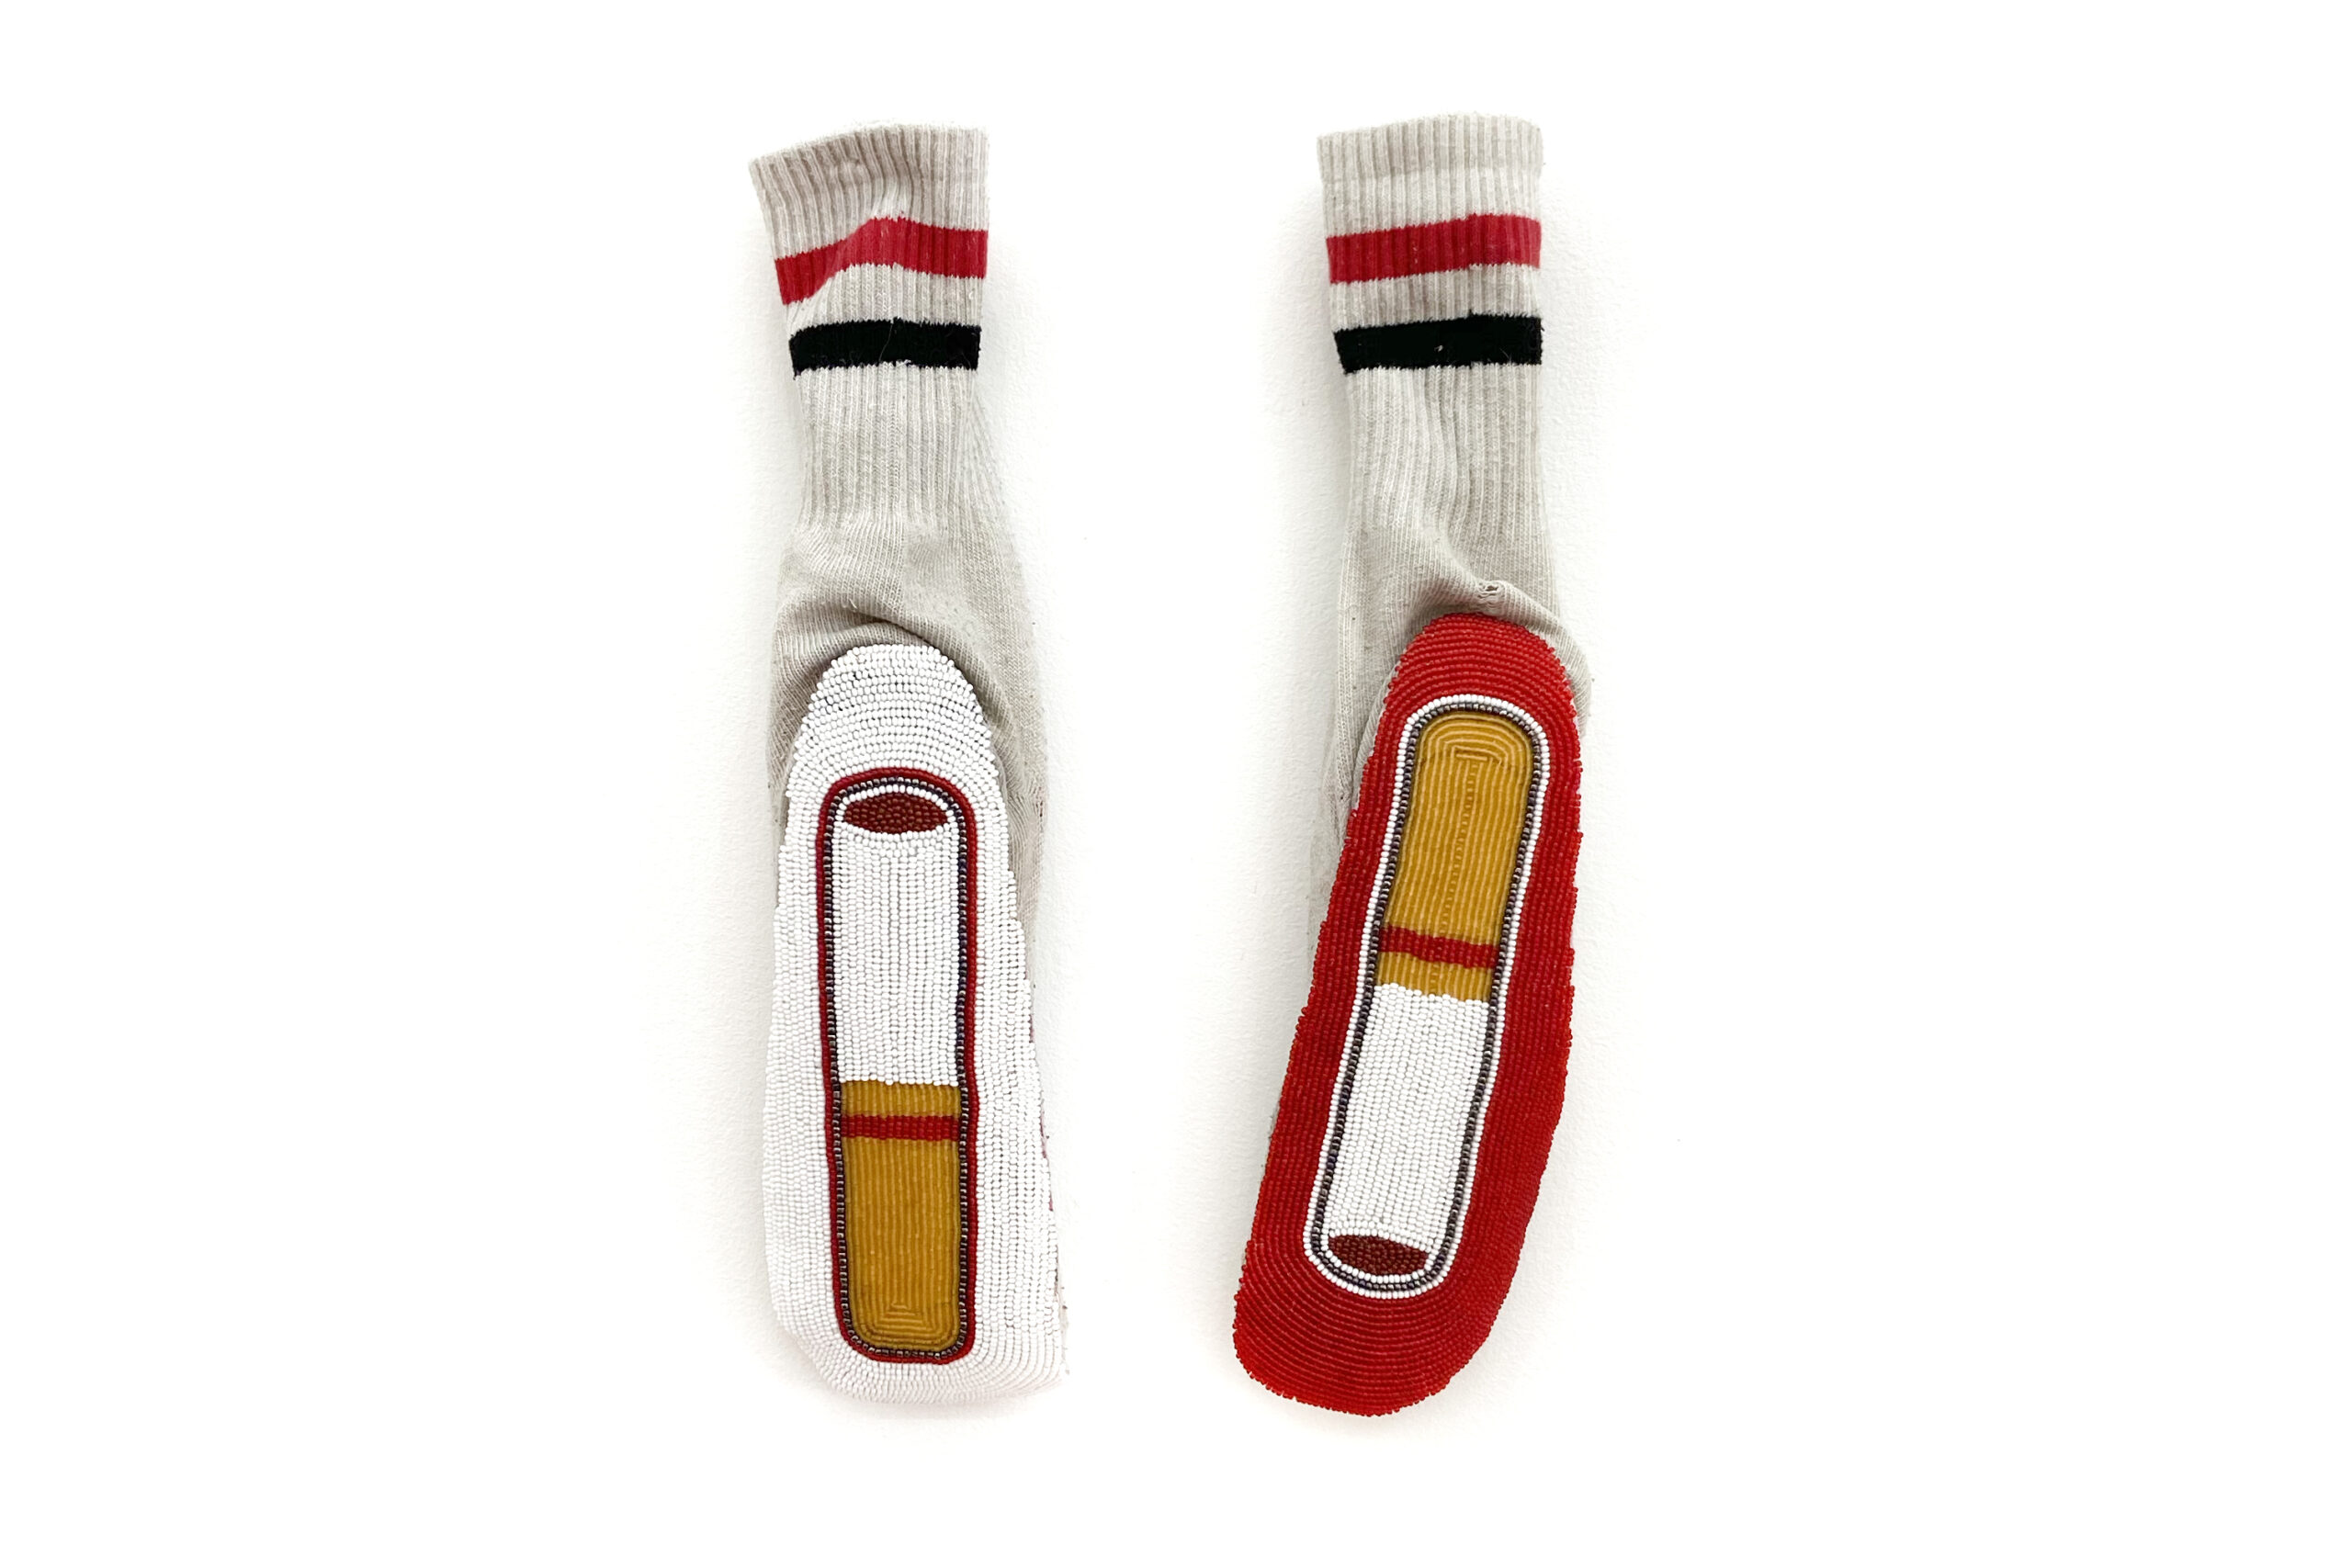 An image of Audie Murray's piece Tabacco Offering. The image shows a pair of white socks. The bands of the sock have two stripes: one red, one black. The soles of the socks face the camera. The sock soles are richly beaded in red, ochre, white and black.